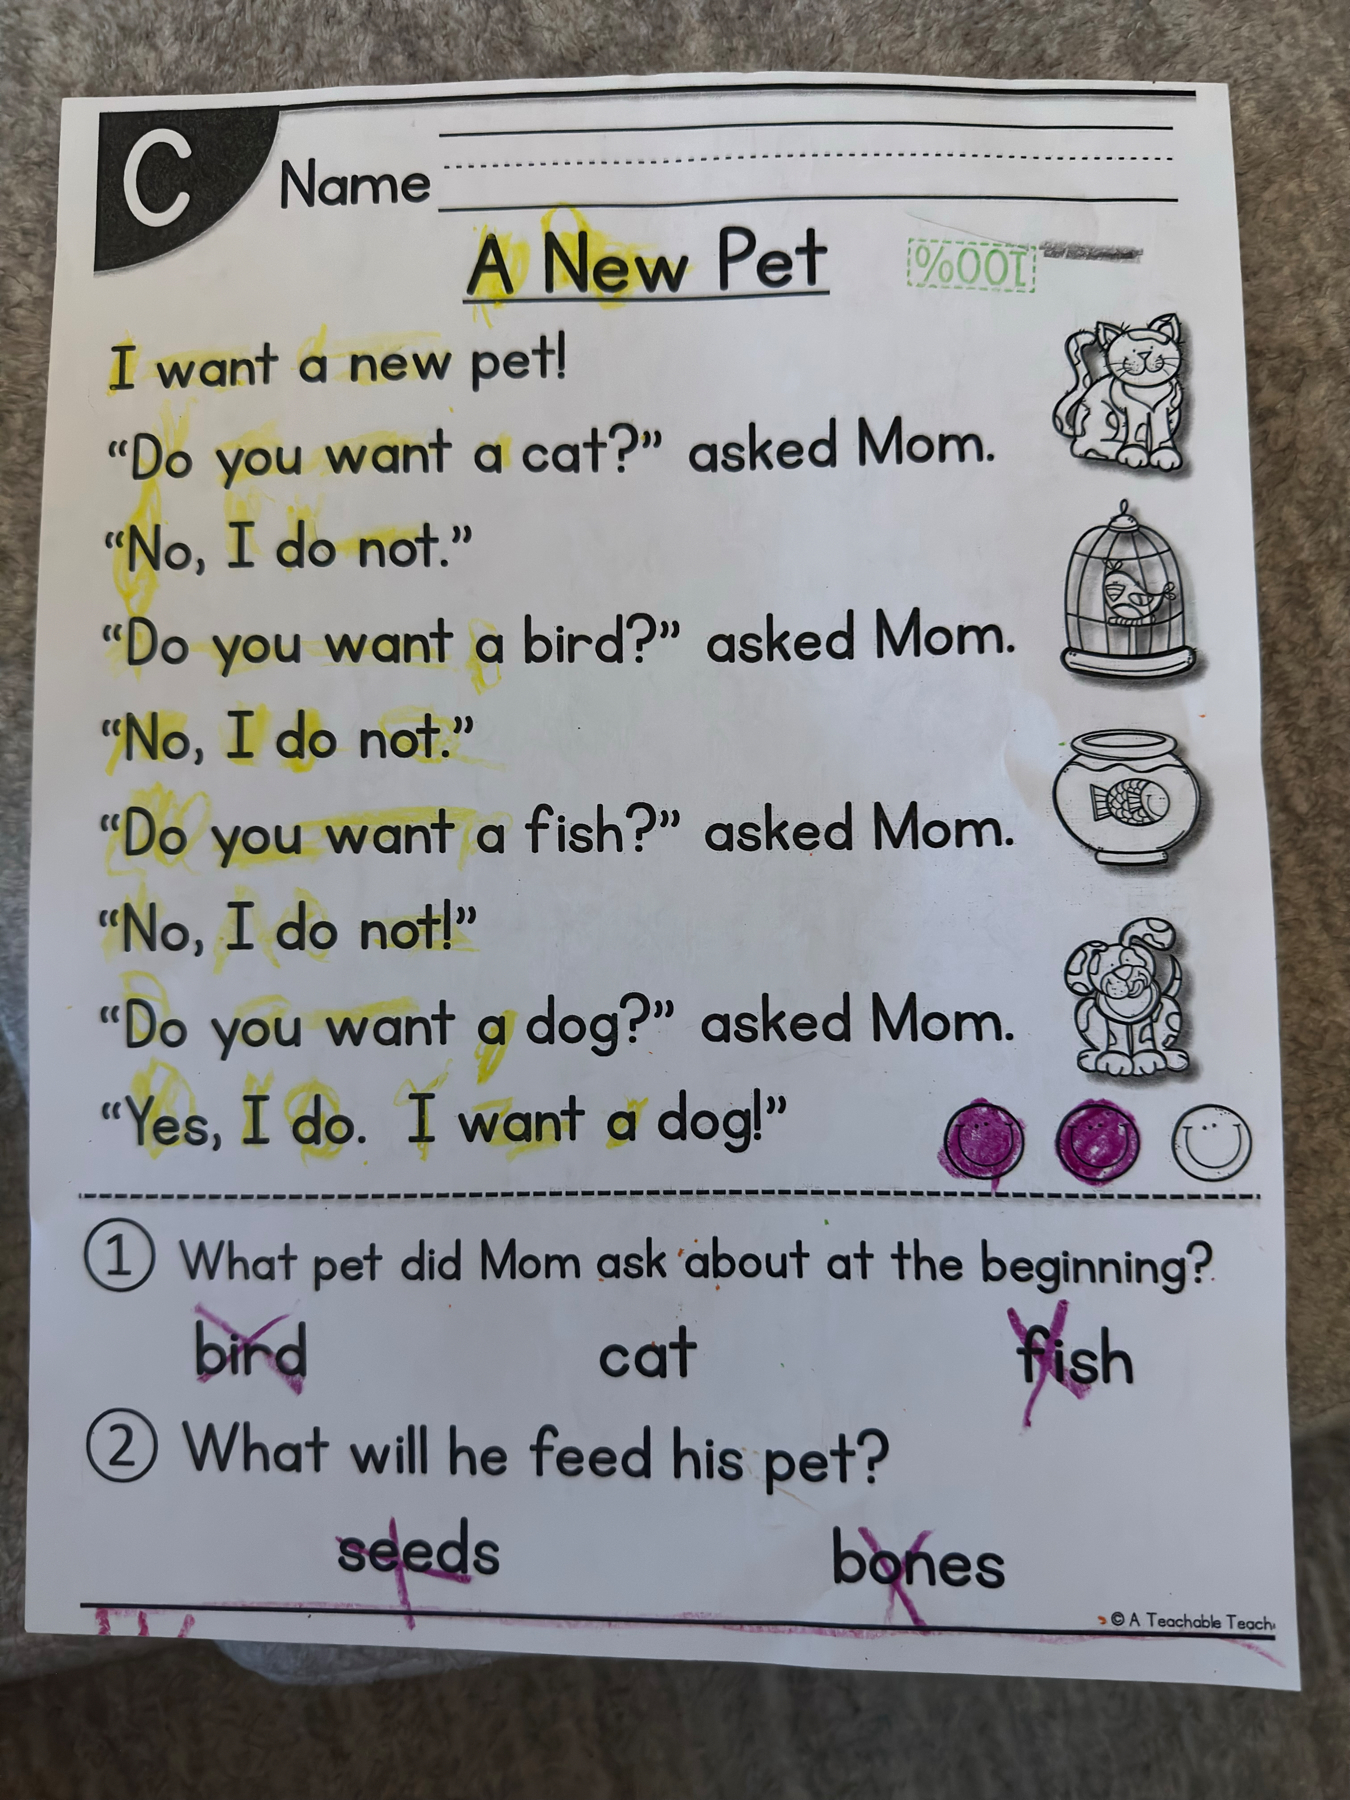 A child’s school worksheet titled “A New Pet” with a short story about choosing a pet and two multiple-choice questions at the bottom. The worksheet includes small illustrations of a cat, a bird in a cage, a fishbowl, and a